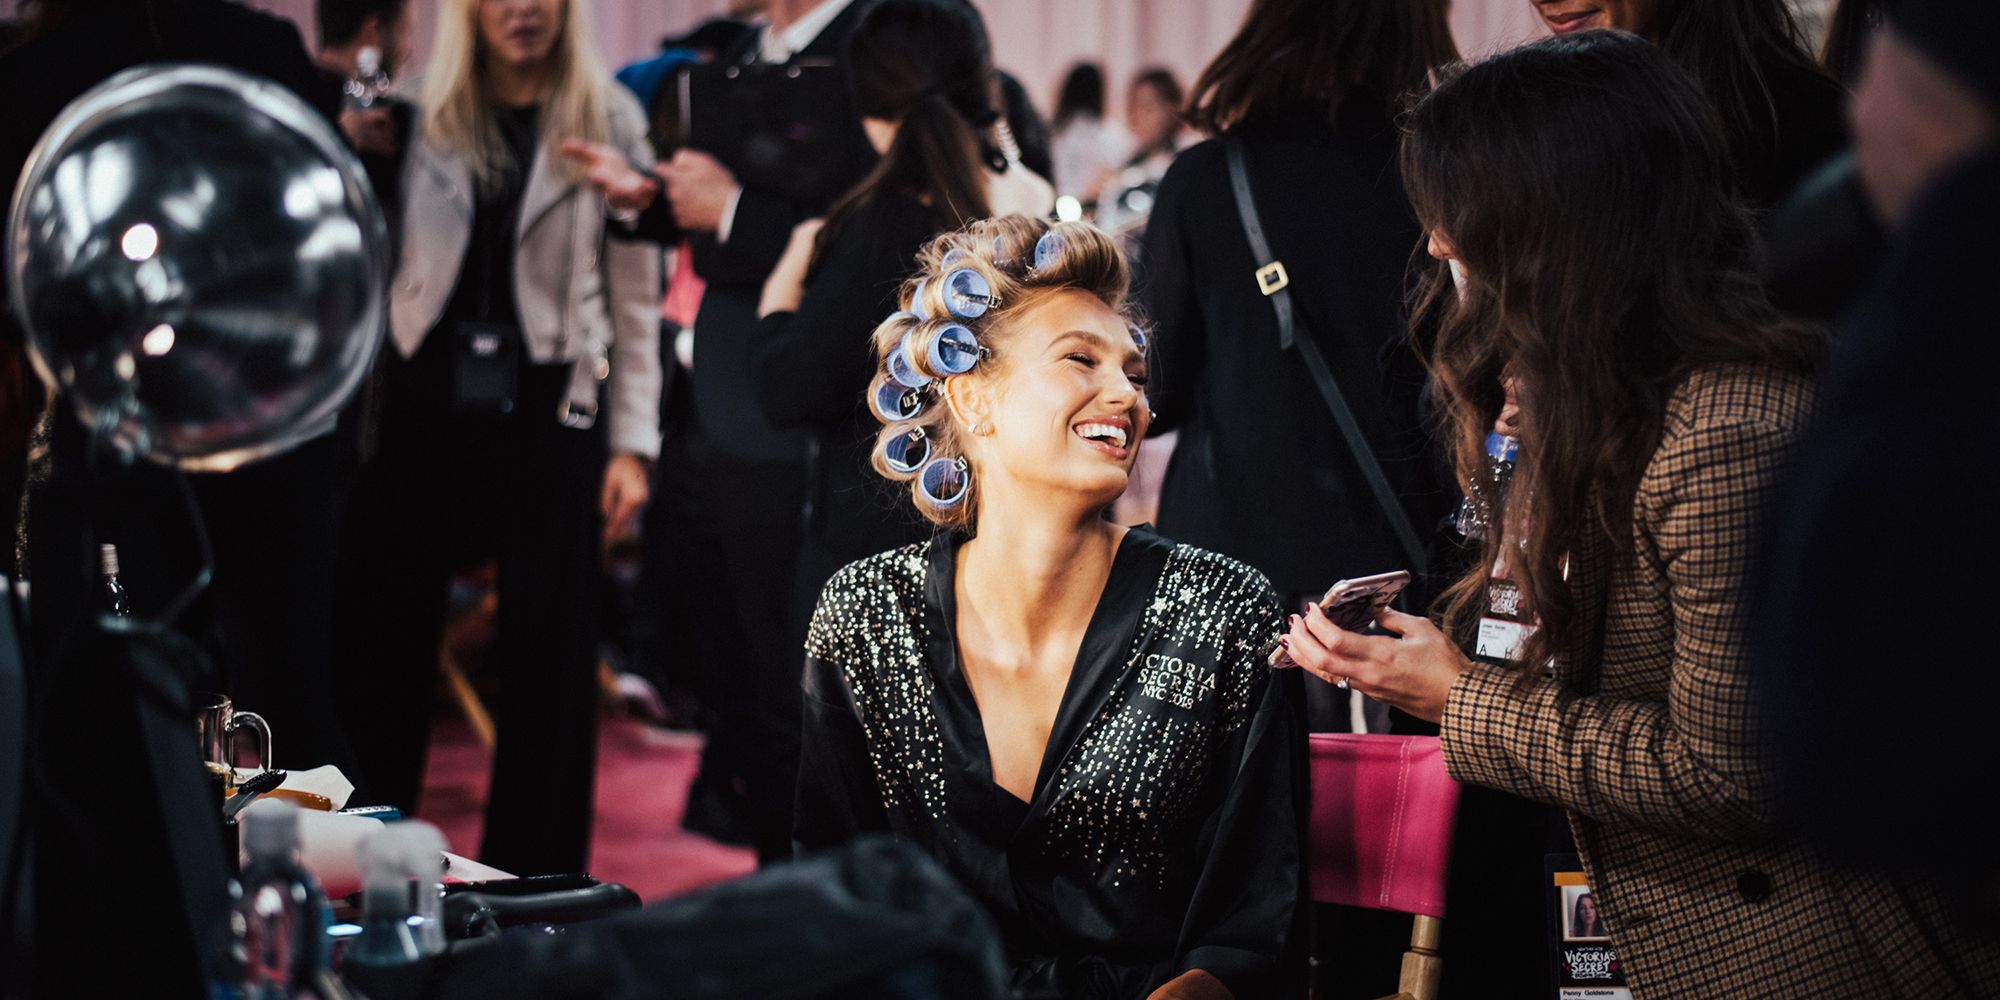 VS Fashion Show 2018: Pics From the Runway & Backstage